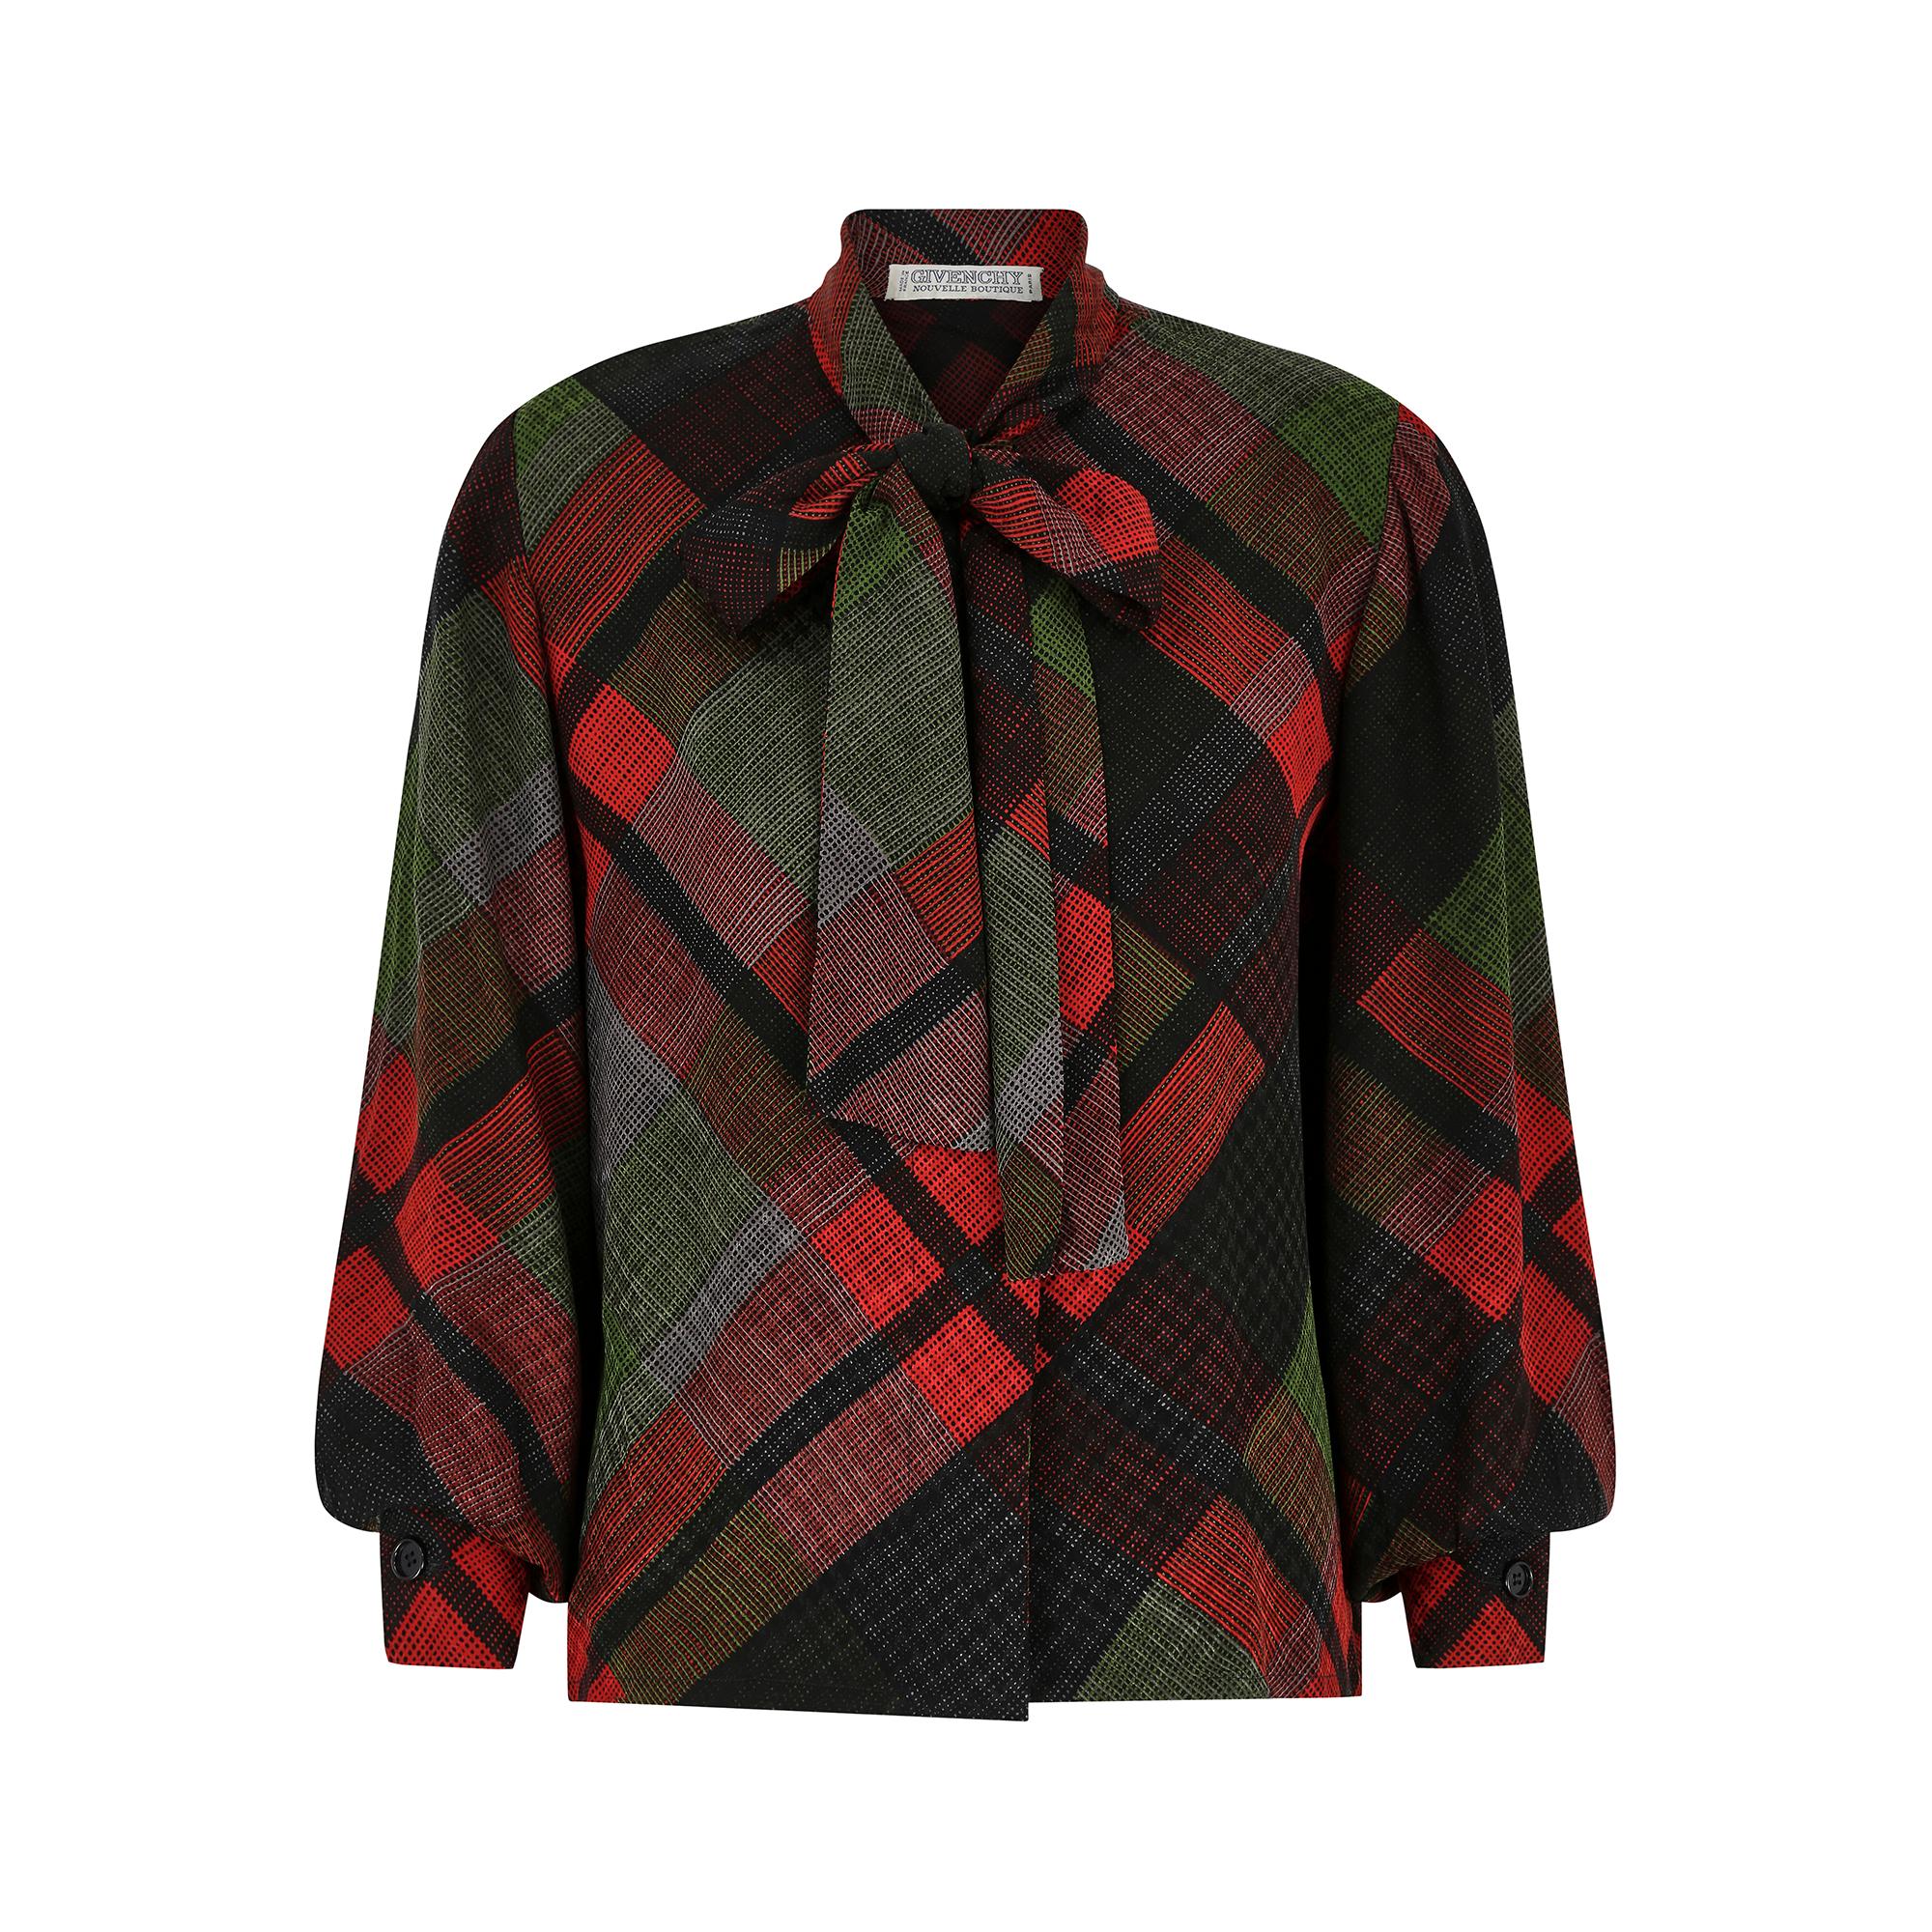 Early 1980s or very late 1970s Givenchy Novelle Boutique pussy bow blouse from the designer’s ready-to-wear collection first debuted 1954 with this line produced from 1971. The fine quality silk fabric features a chic red, black and green plaid that